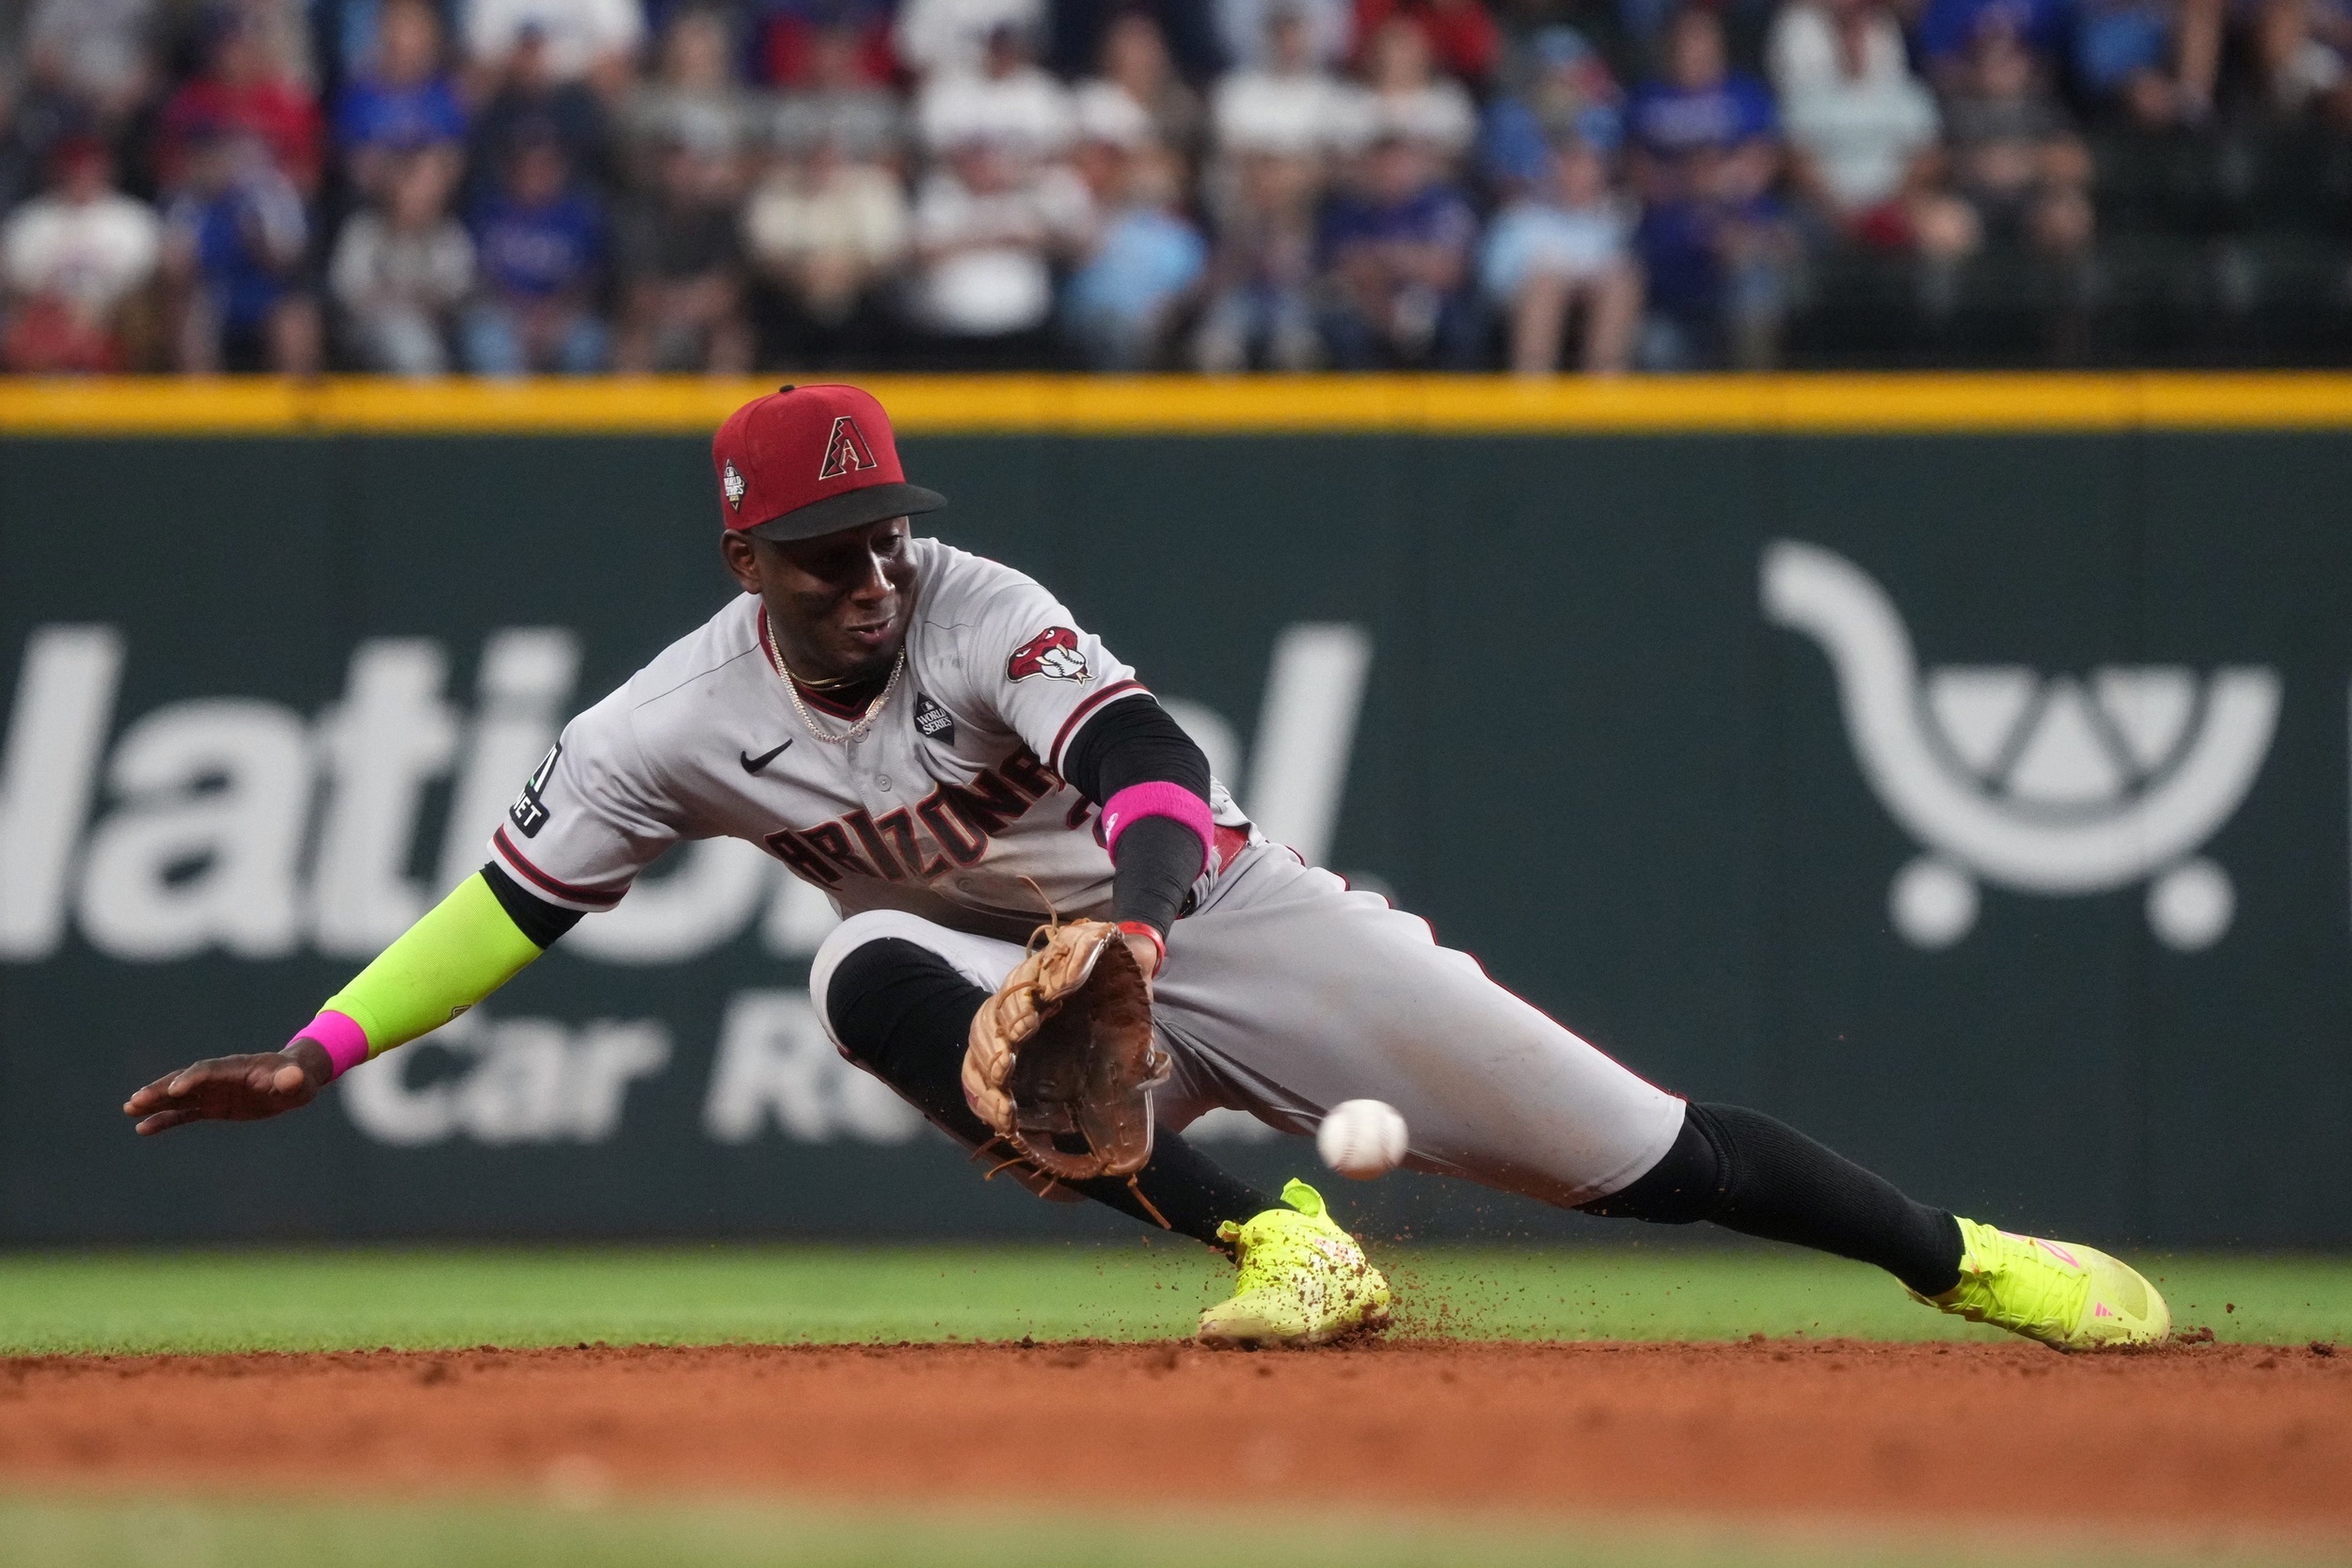 with a top prospect rostered, who will start at shortstop for the diamondbacks?